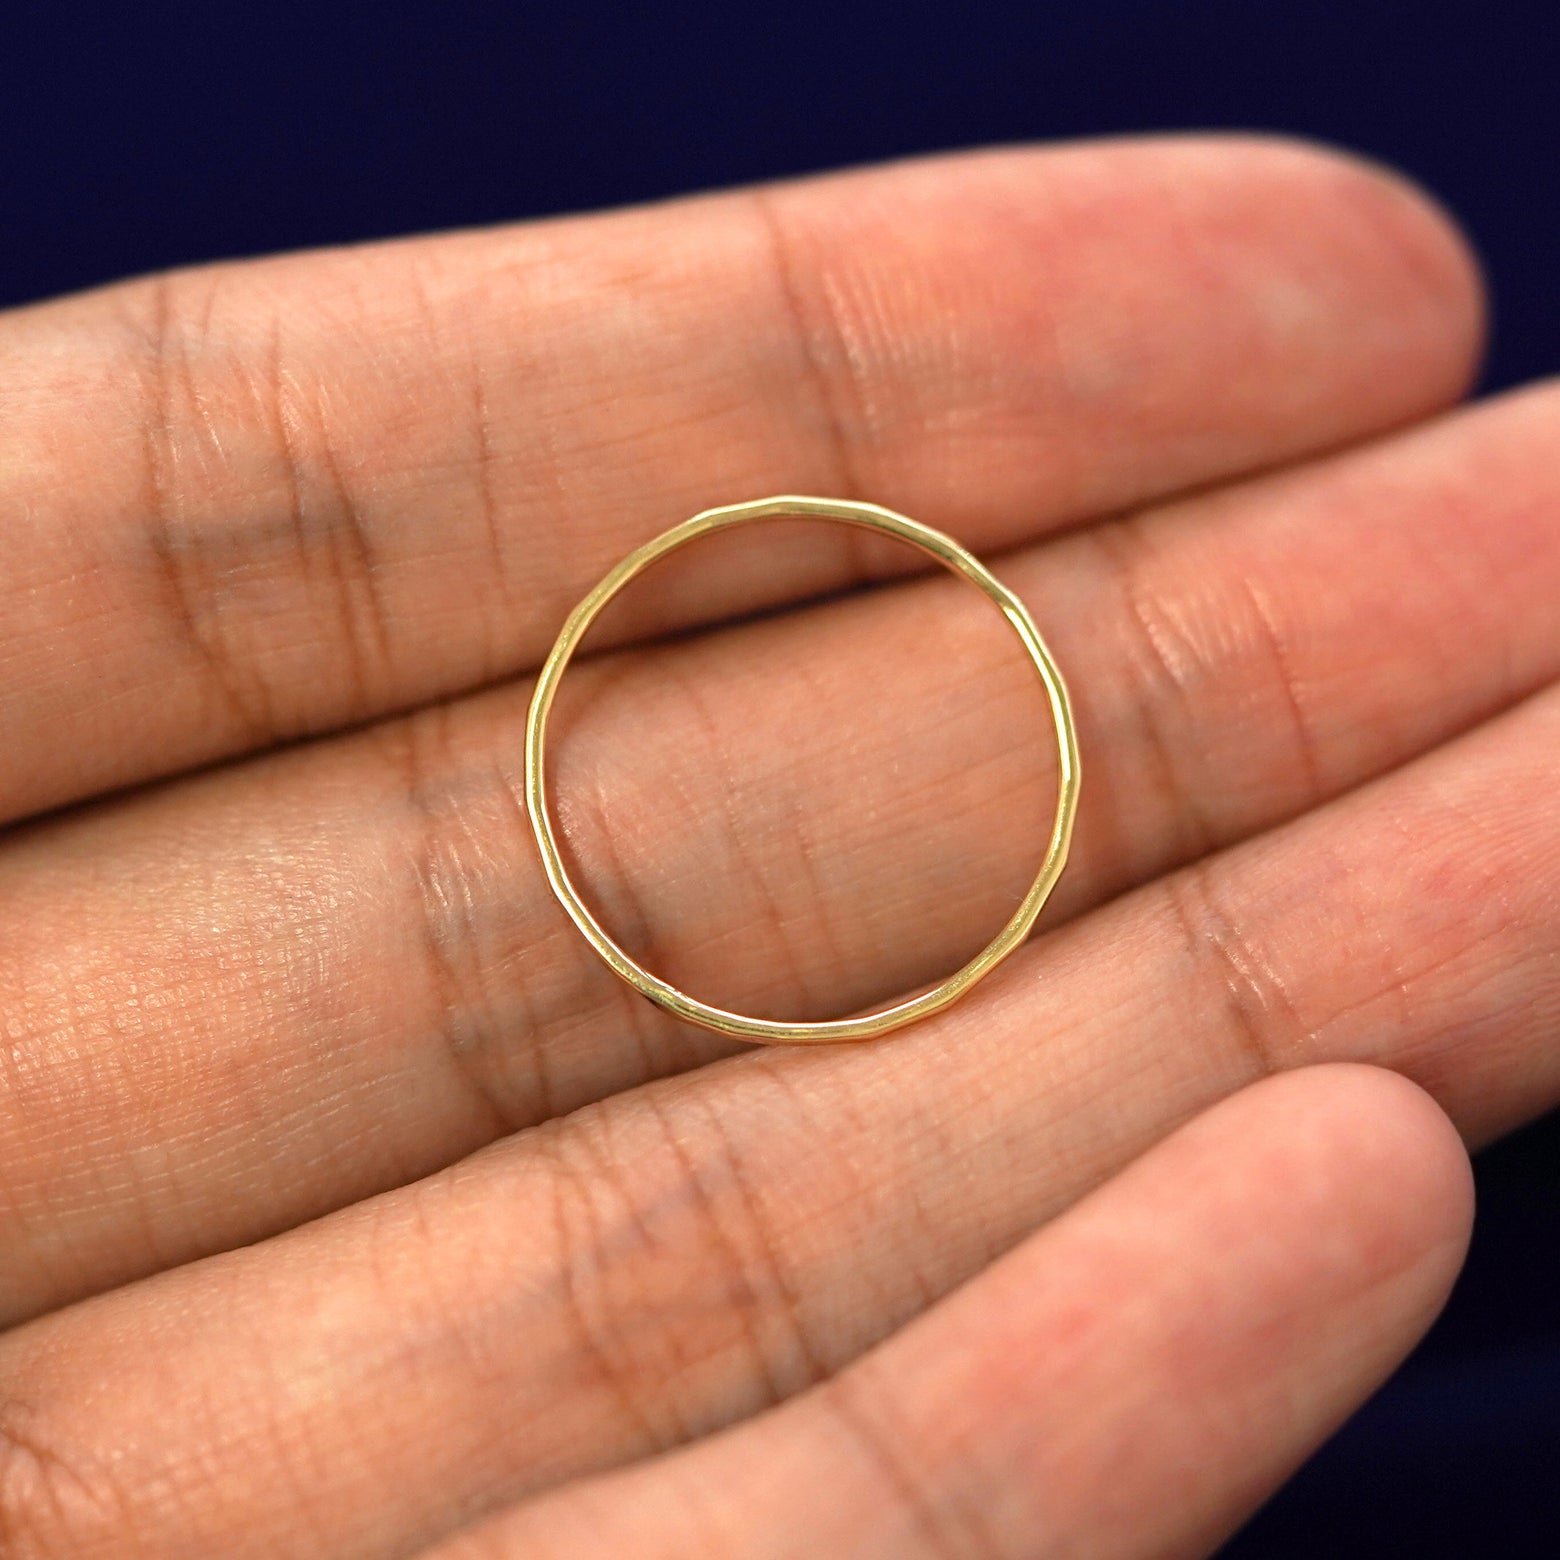 A yellow gold Hammered Ring in a model's hand showing the thickness of the band